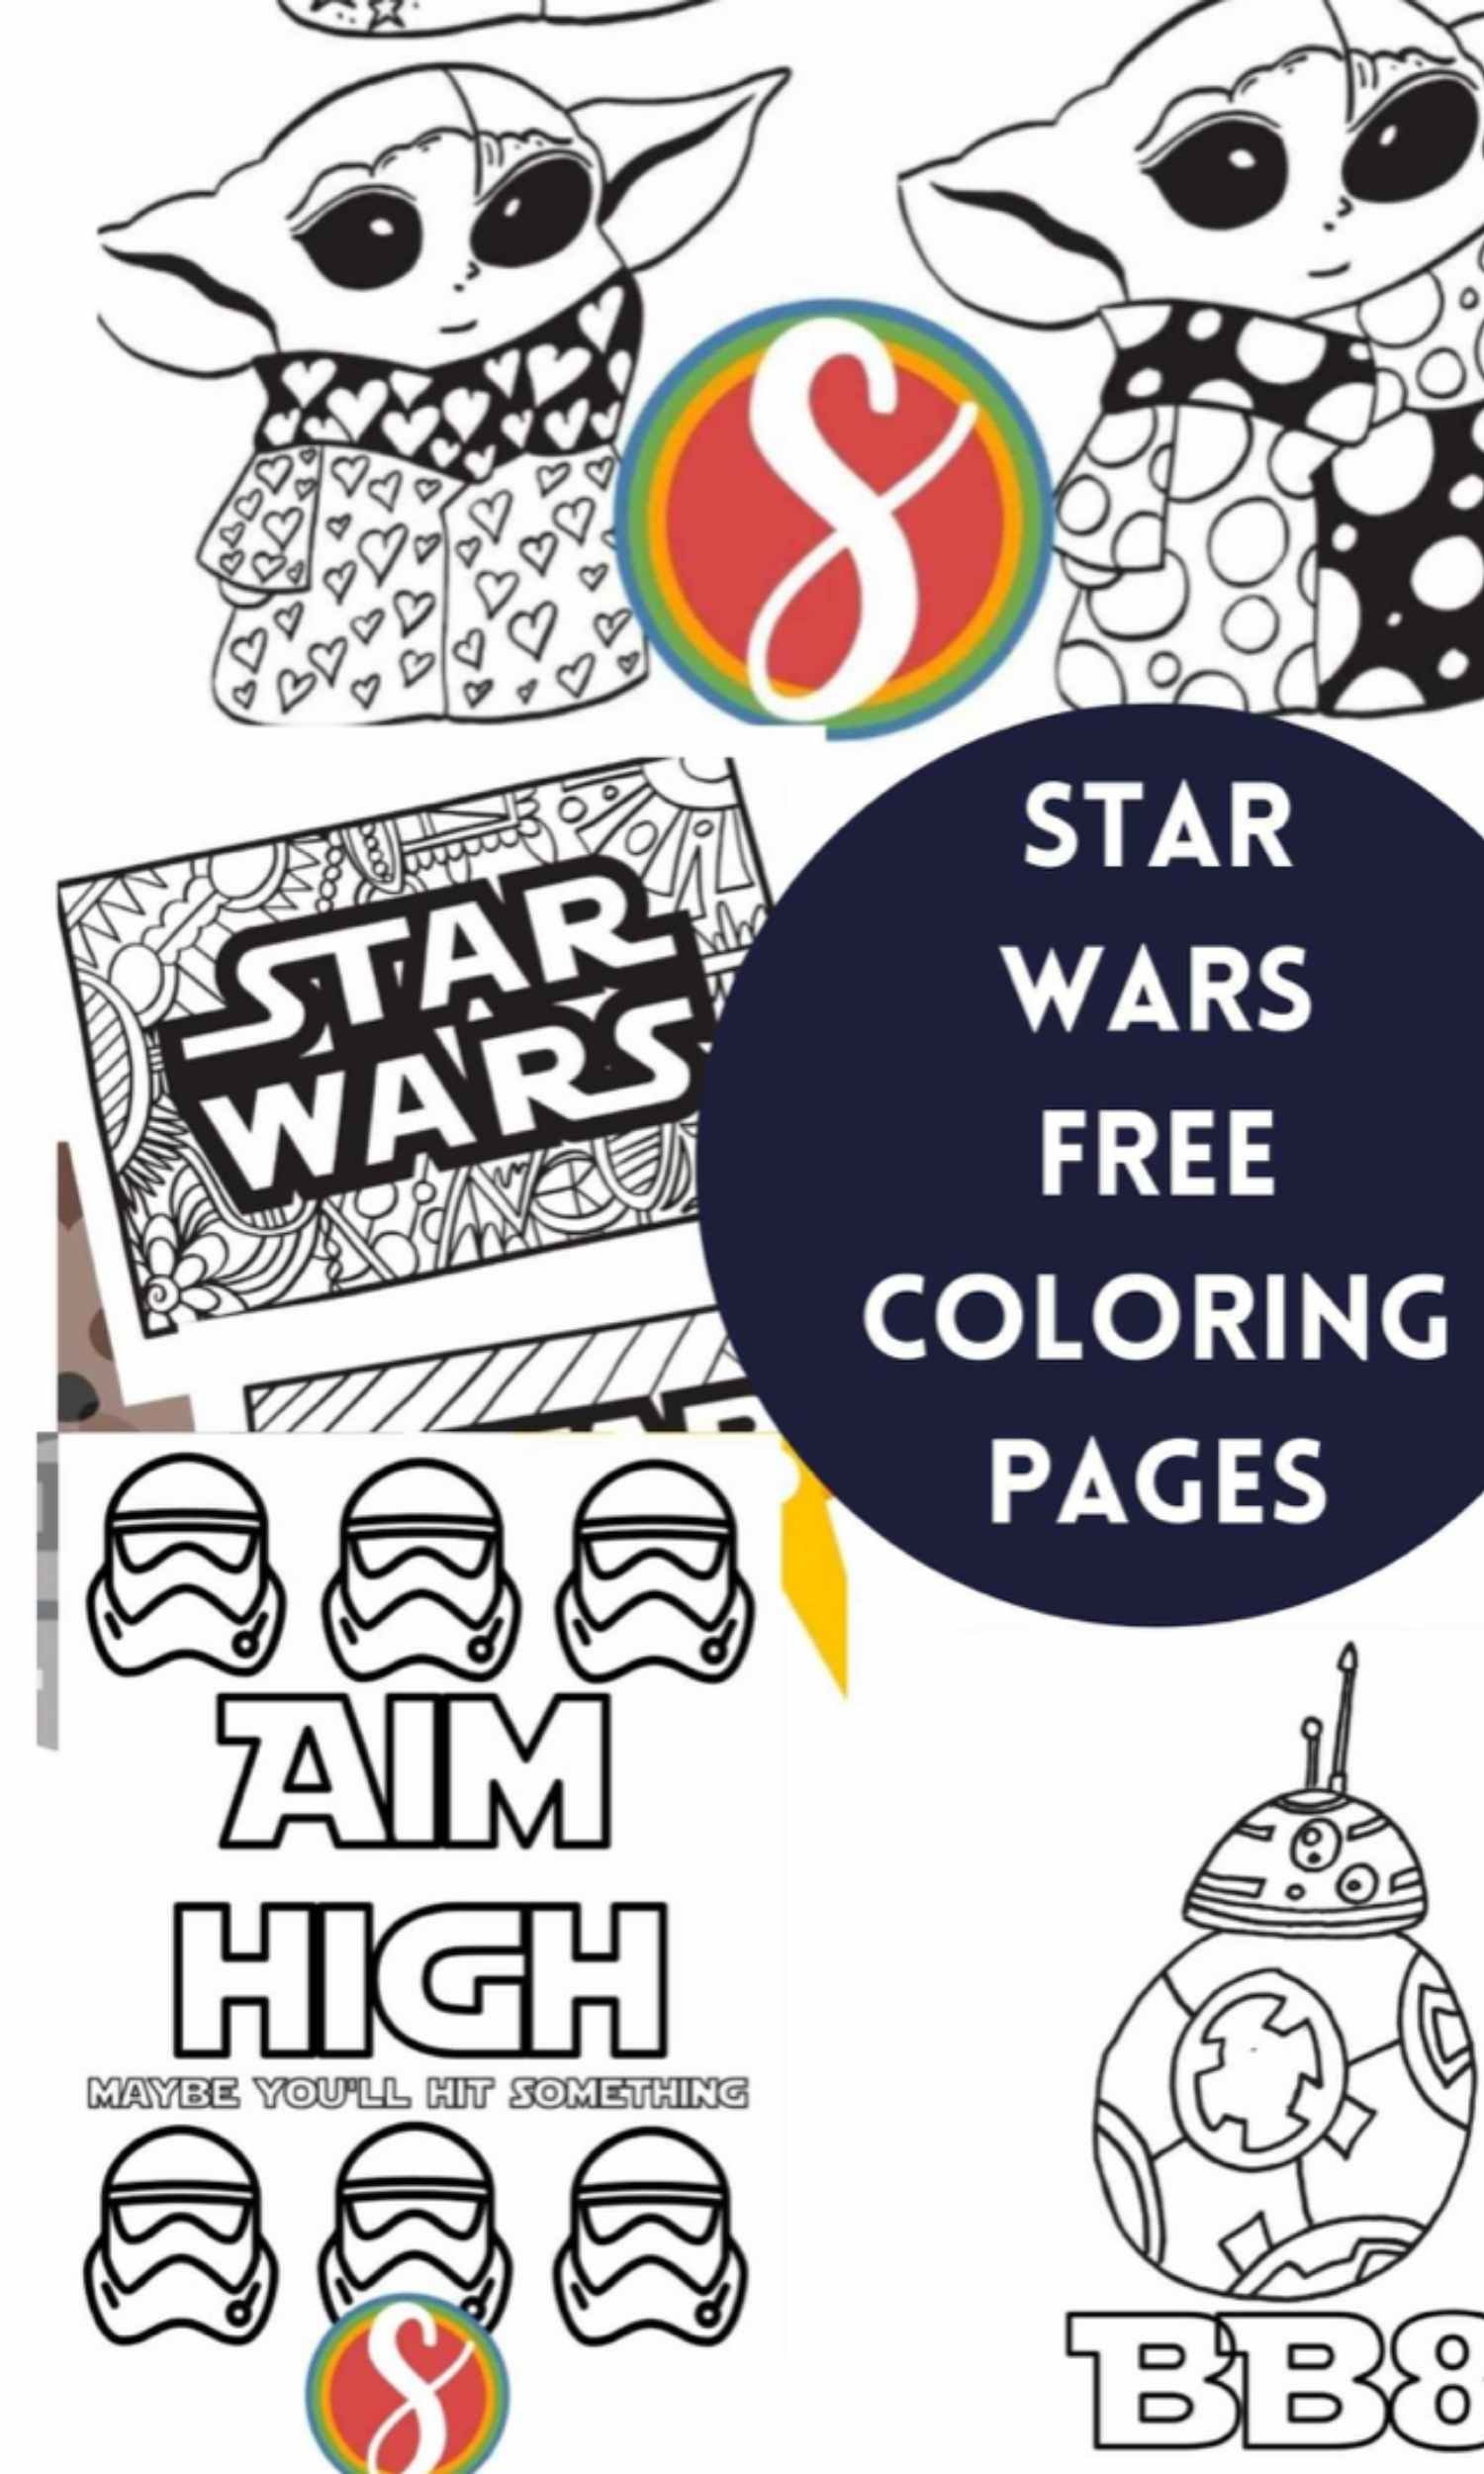 collage of star wars coloring pages with drawings of storm trooper heads, BB8, and star wars logo with colorable doodles